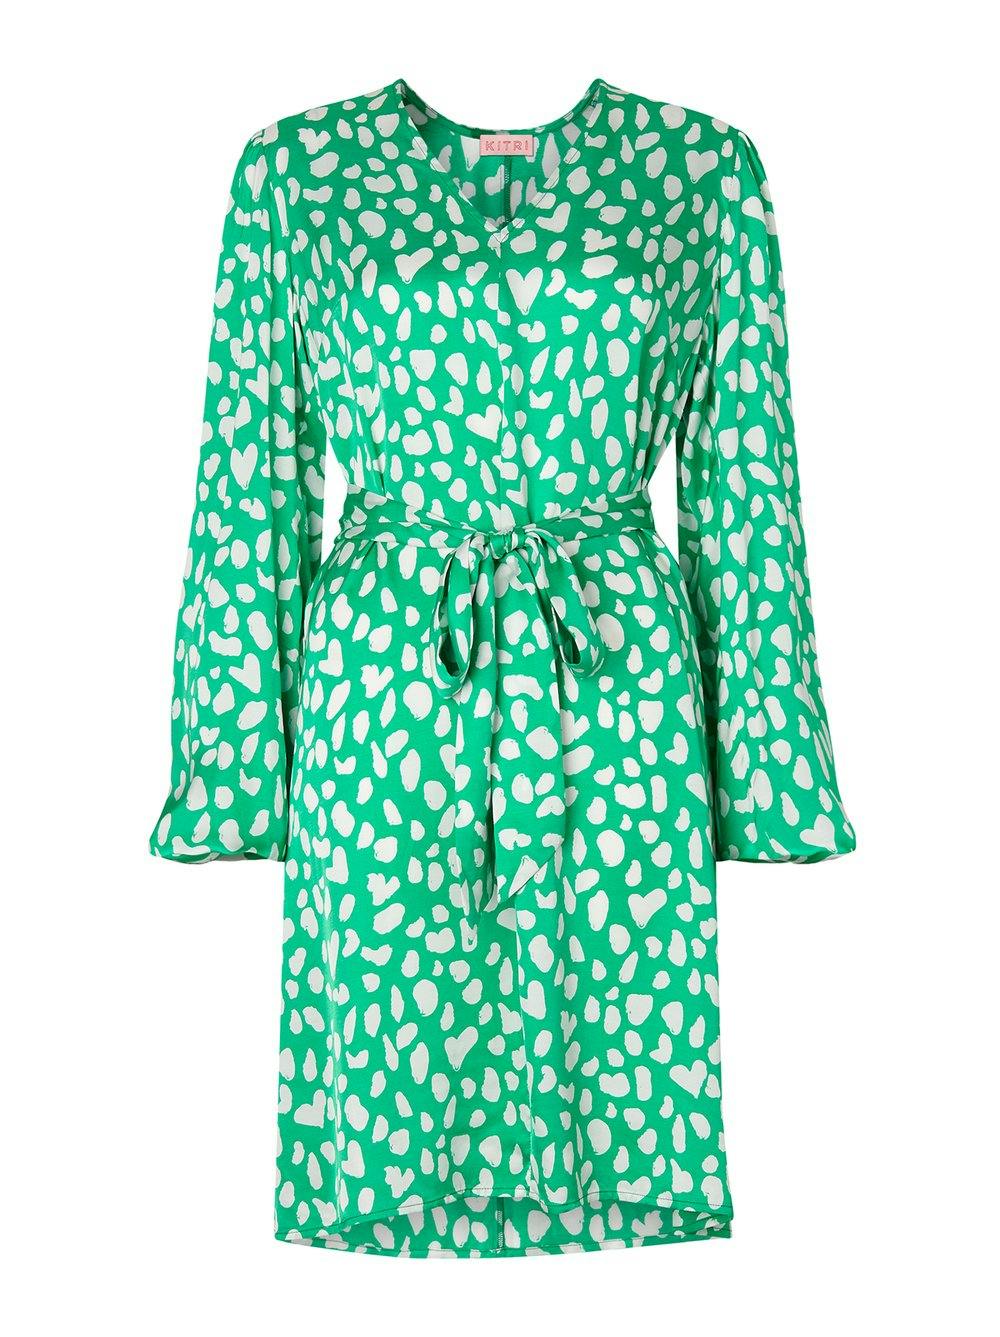 9 best printed green dresses to shop for summer